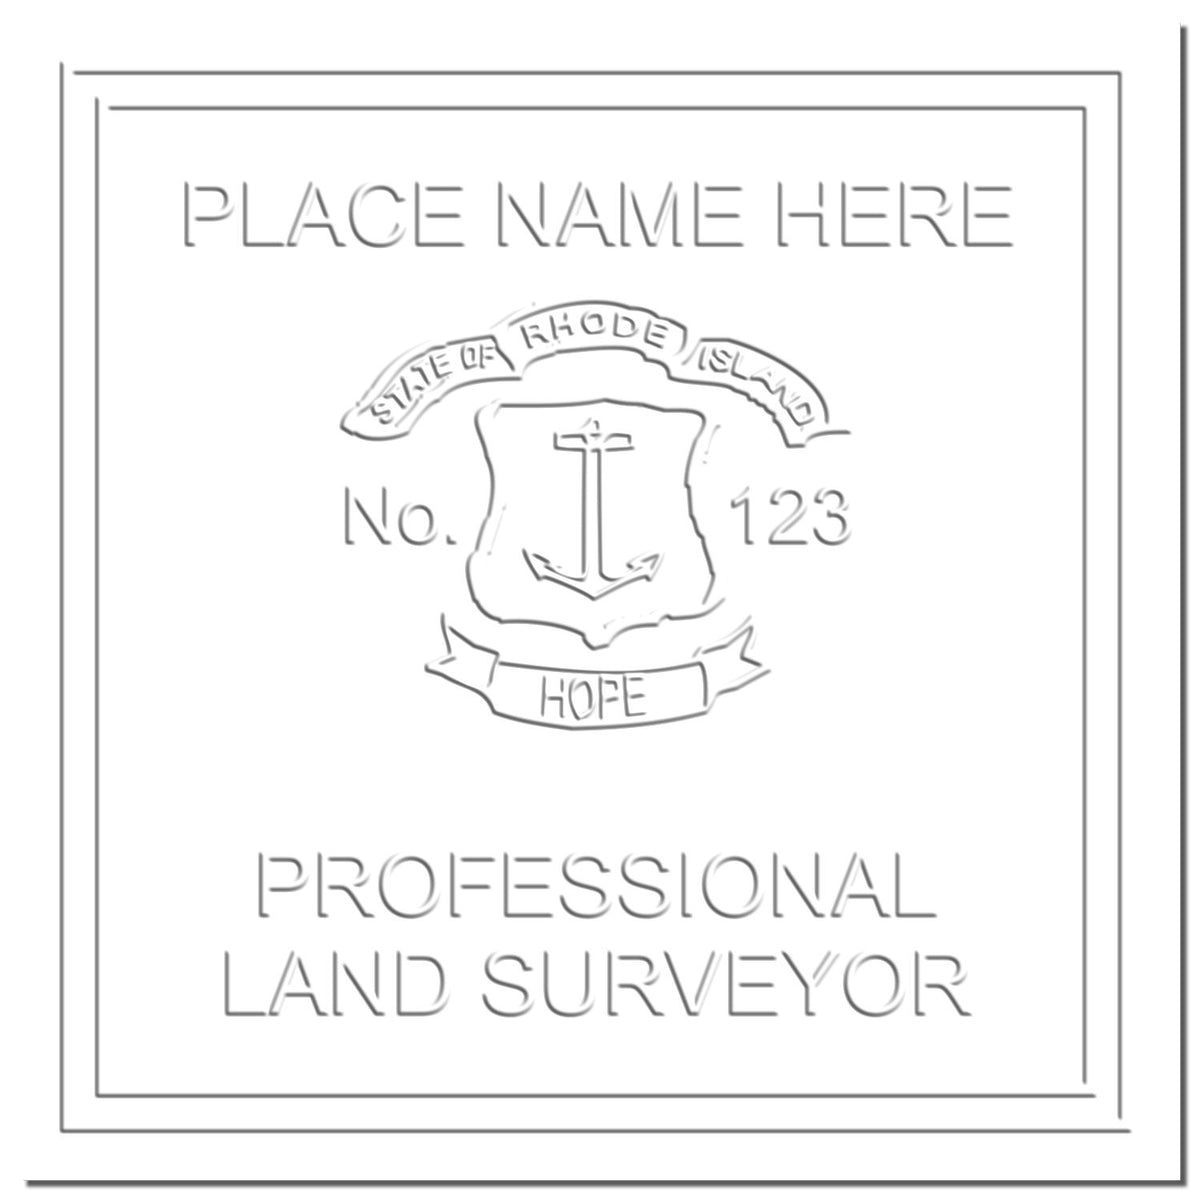 This paper is stamped with a sample imprint of the Hybrid Rhode Island Land Surveyor Seal, signifying its quality and reliability.